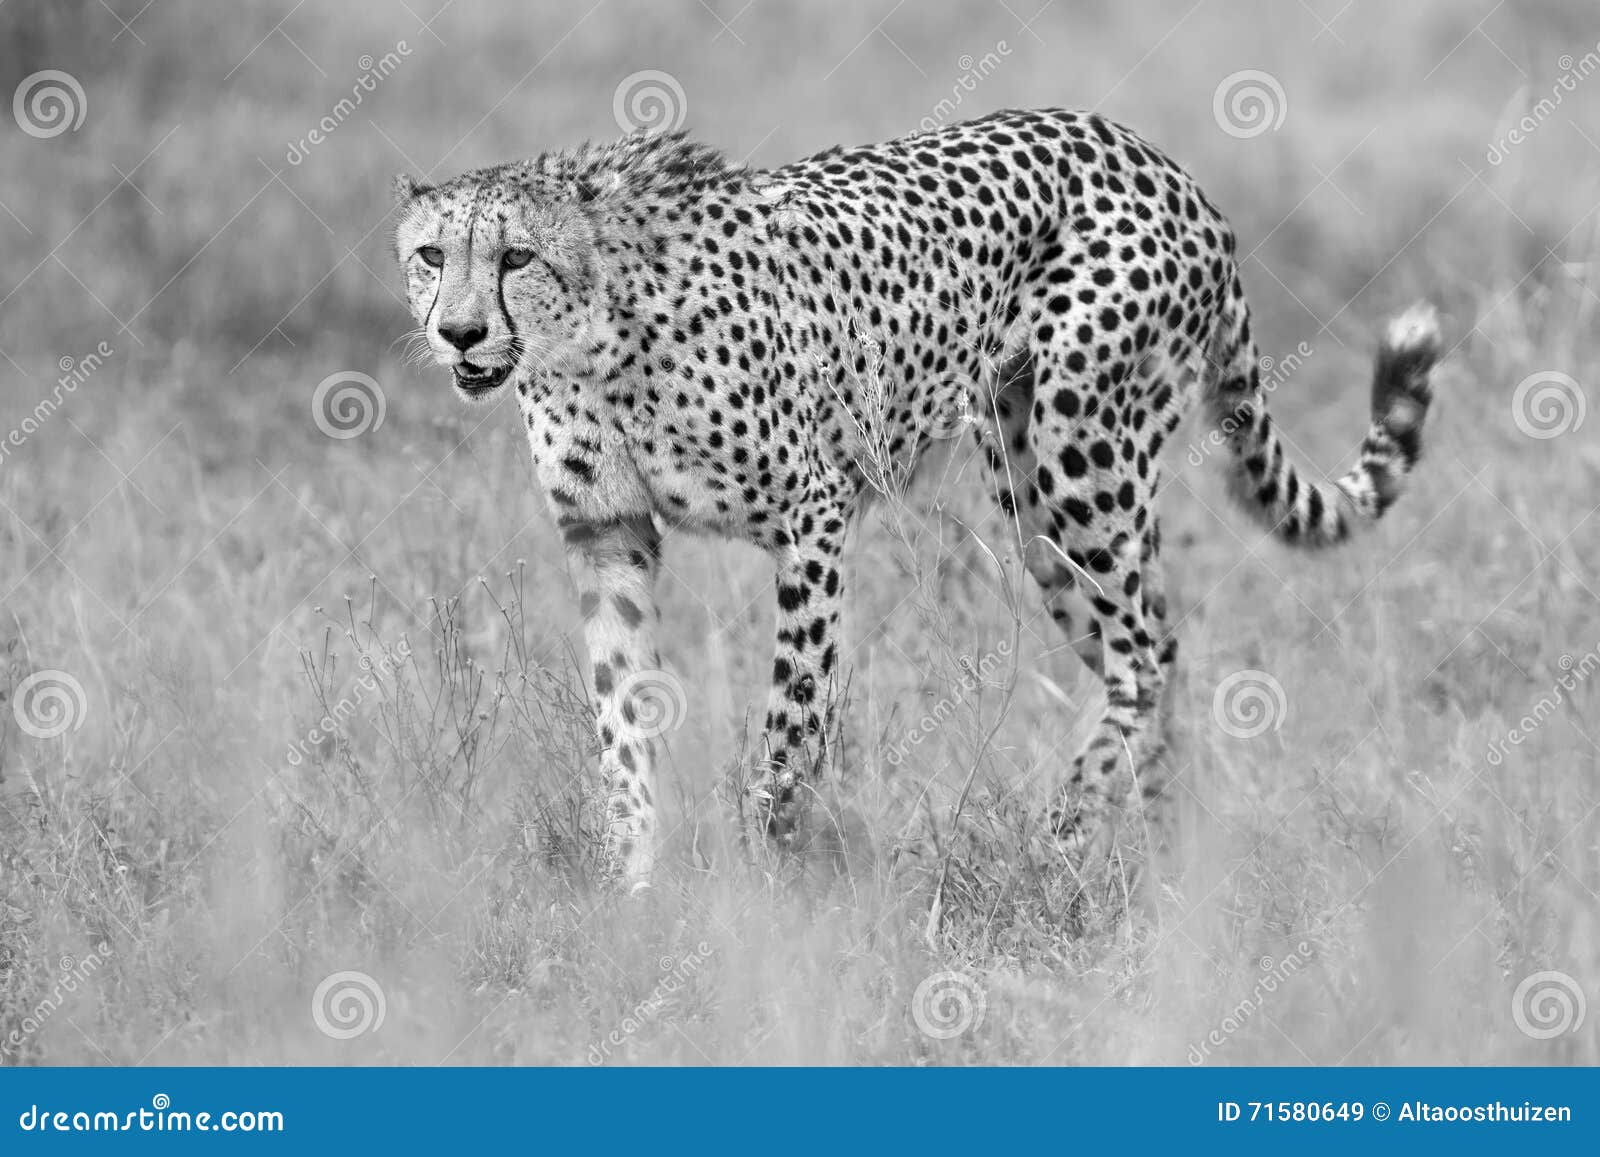 Cheetah Hunting through Dry Grass for Prey To Chase Stock Image - Image ...